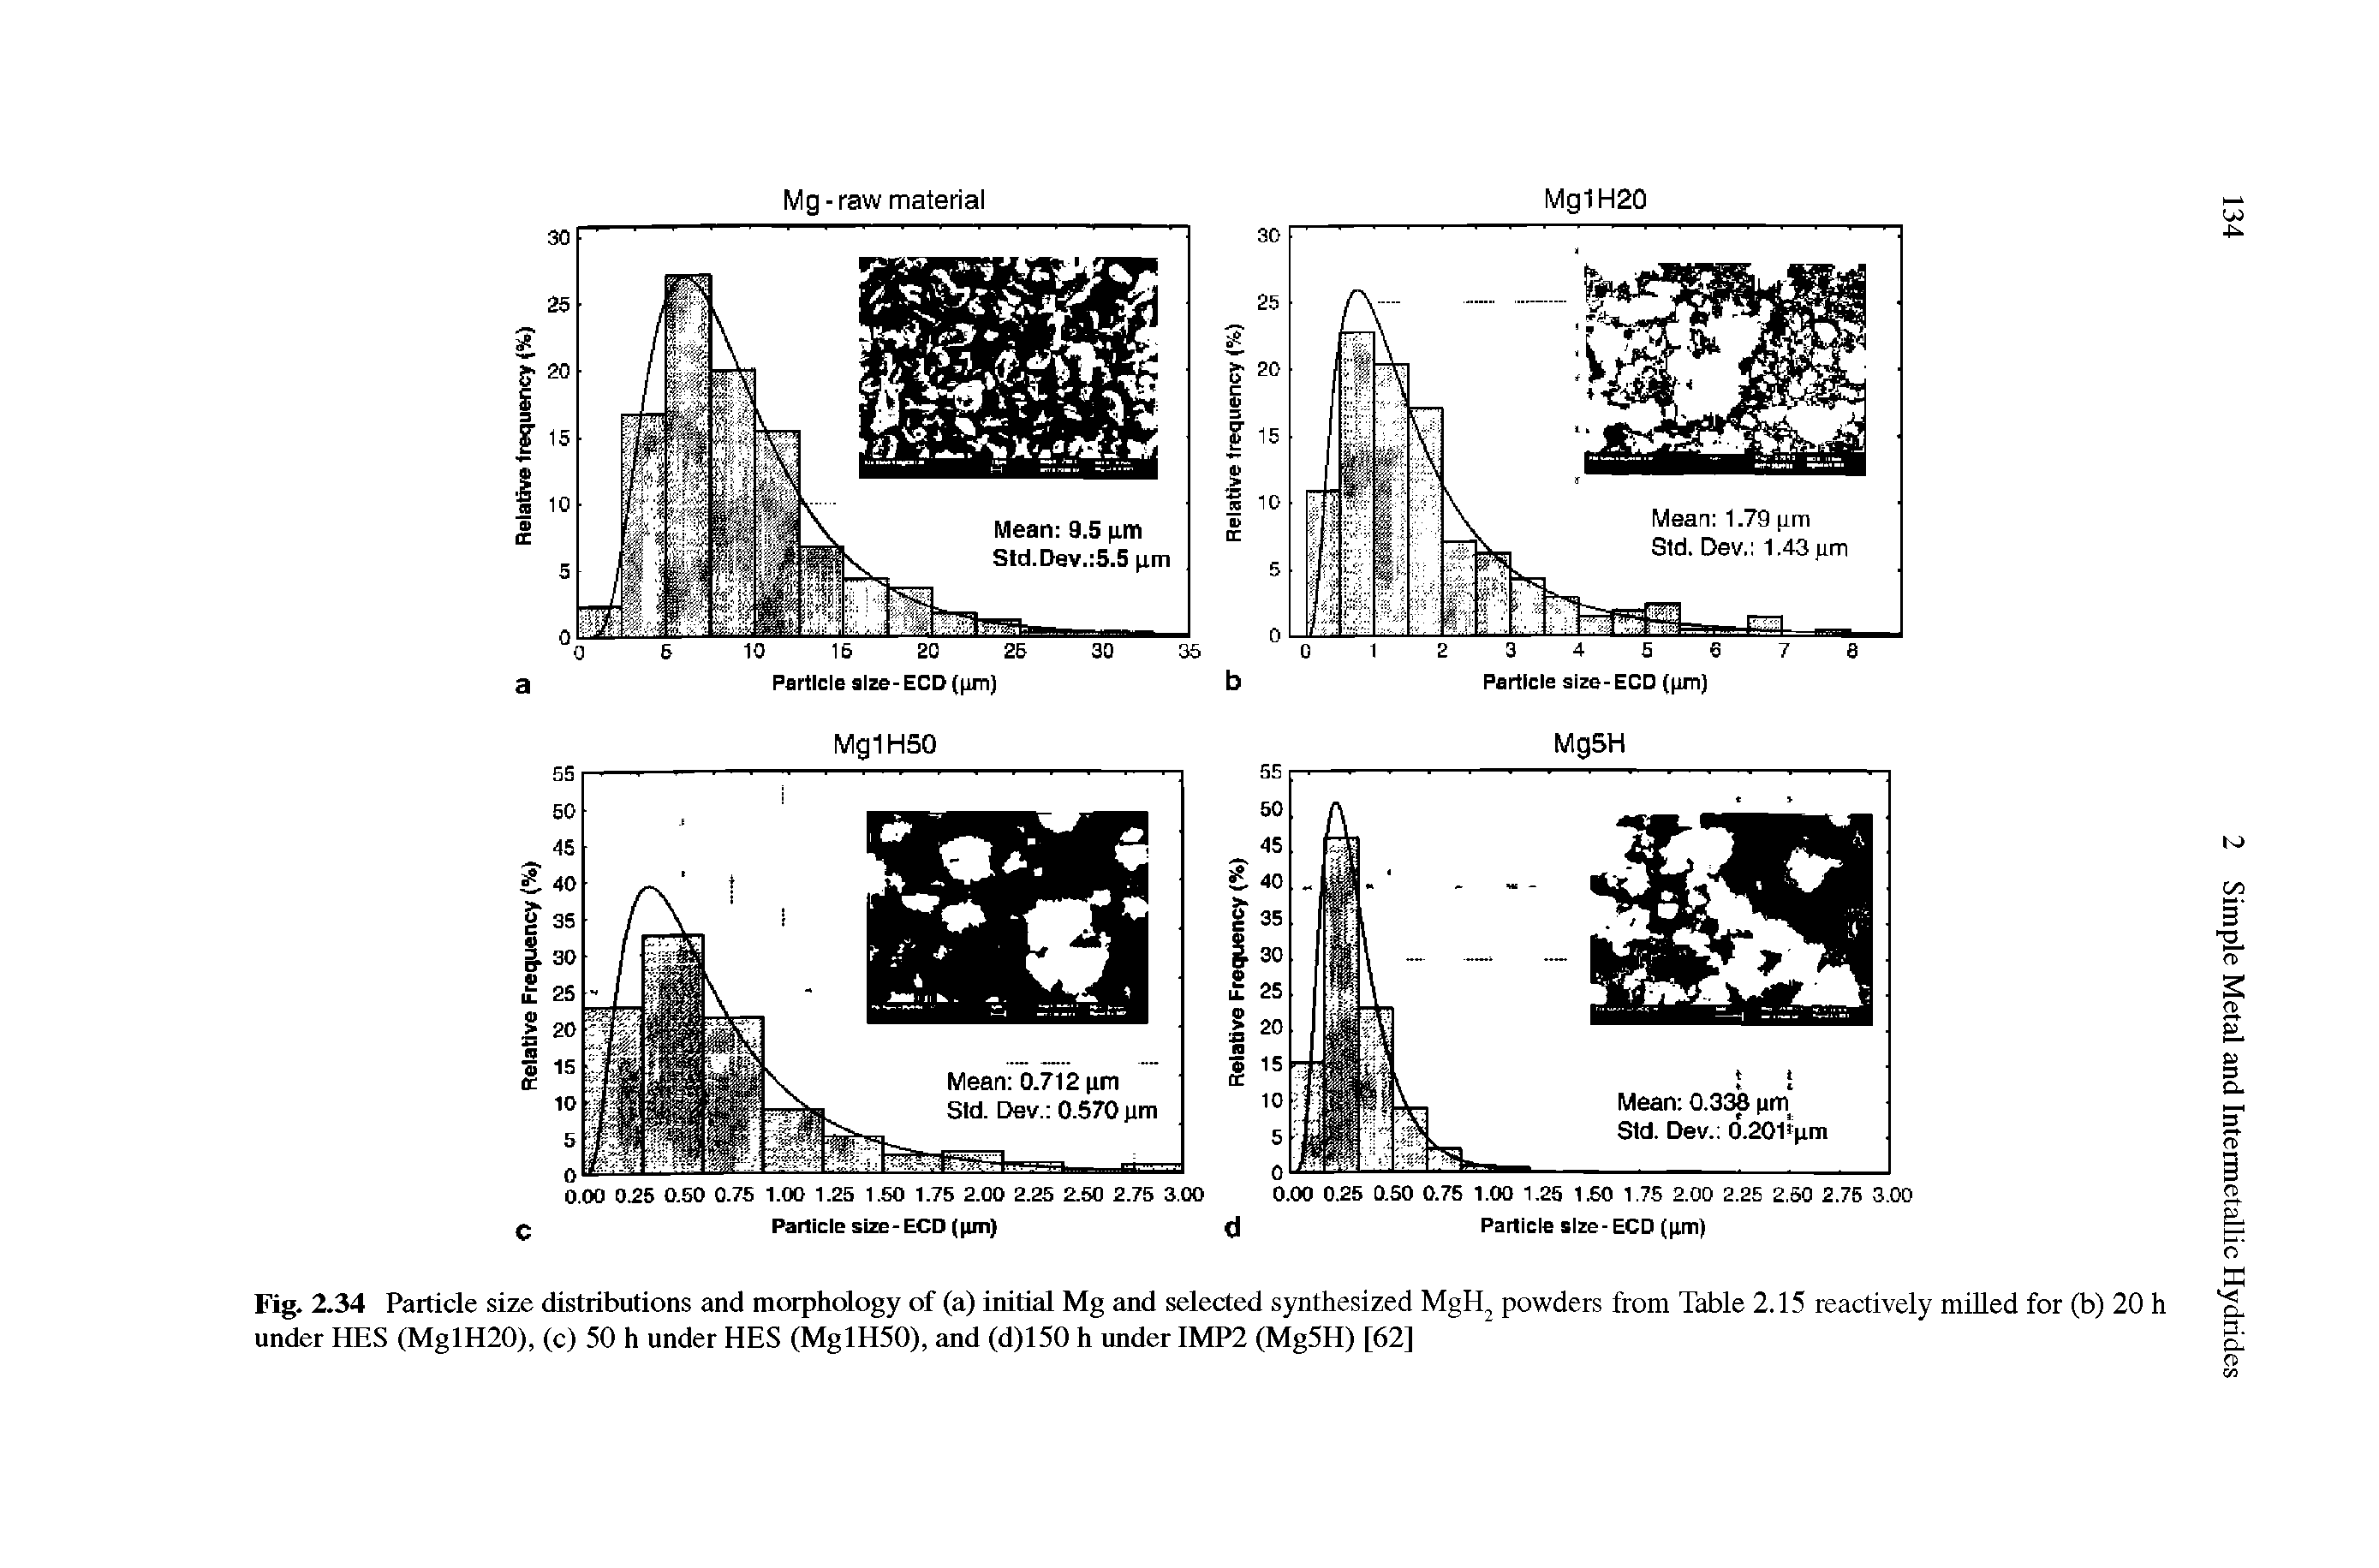 Fig. 2.34 Particle size distributions and morphology of (a) initial Mg and selected synthesized MgH powders from Table 2.15 reactively milled for (b) 20 h under HES (MglH20), (c) 50 h under HES (MglHSO), and (d)150 h under IMP2 (MgSH) [62]...